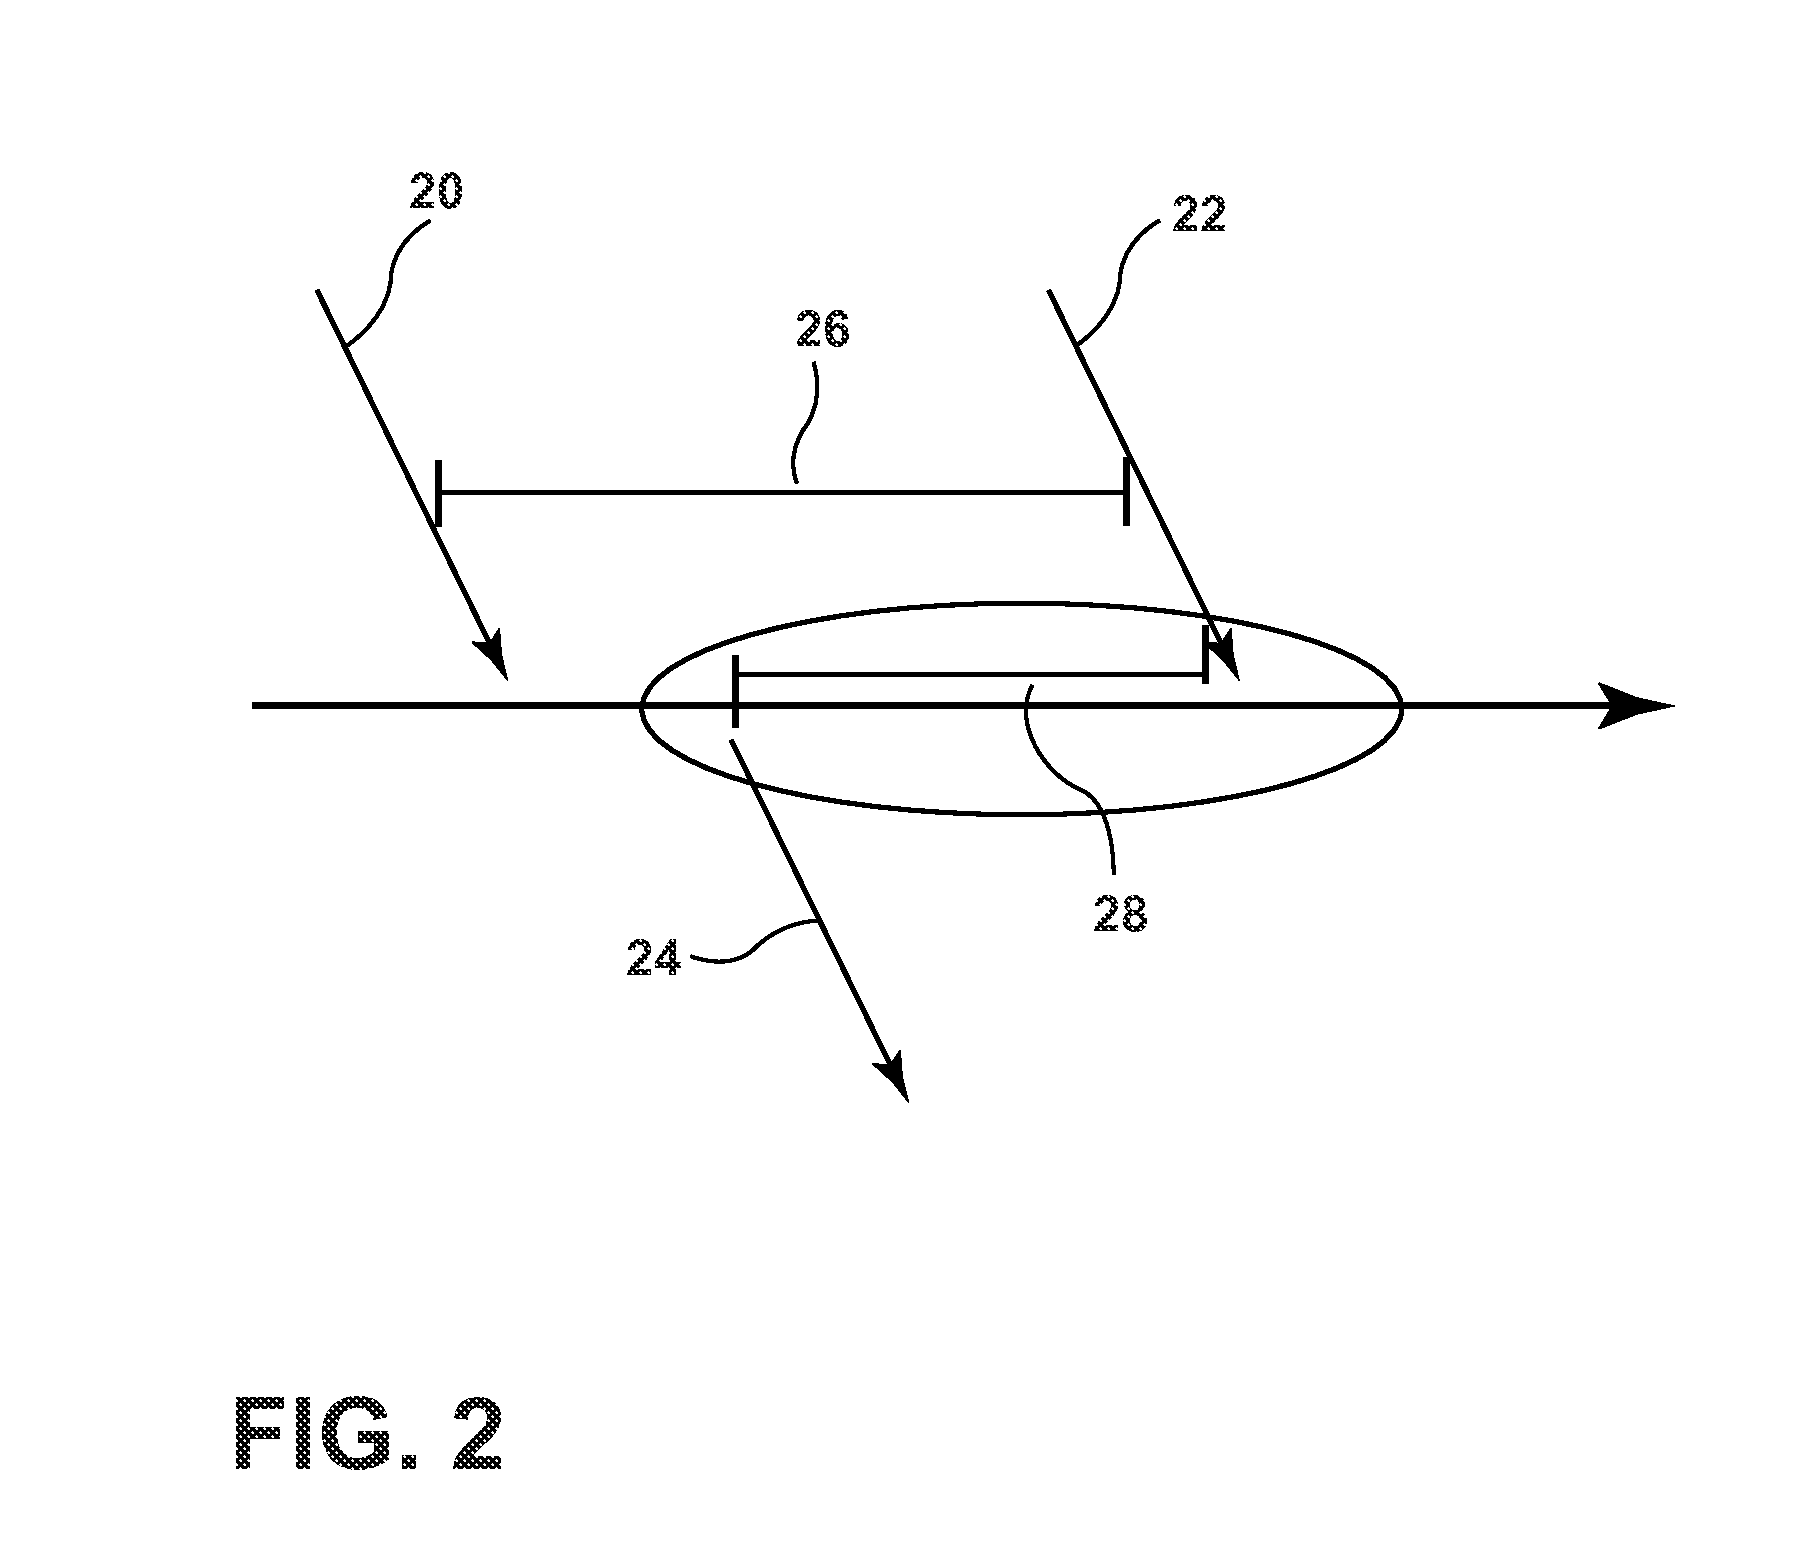 Method for rescheduling flights affected by a disruption and an airline operations control system and controller